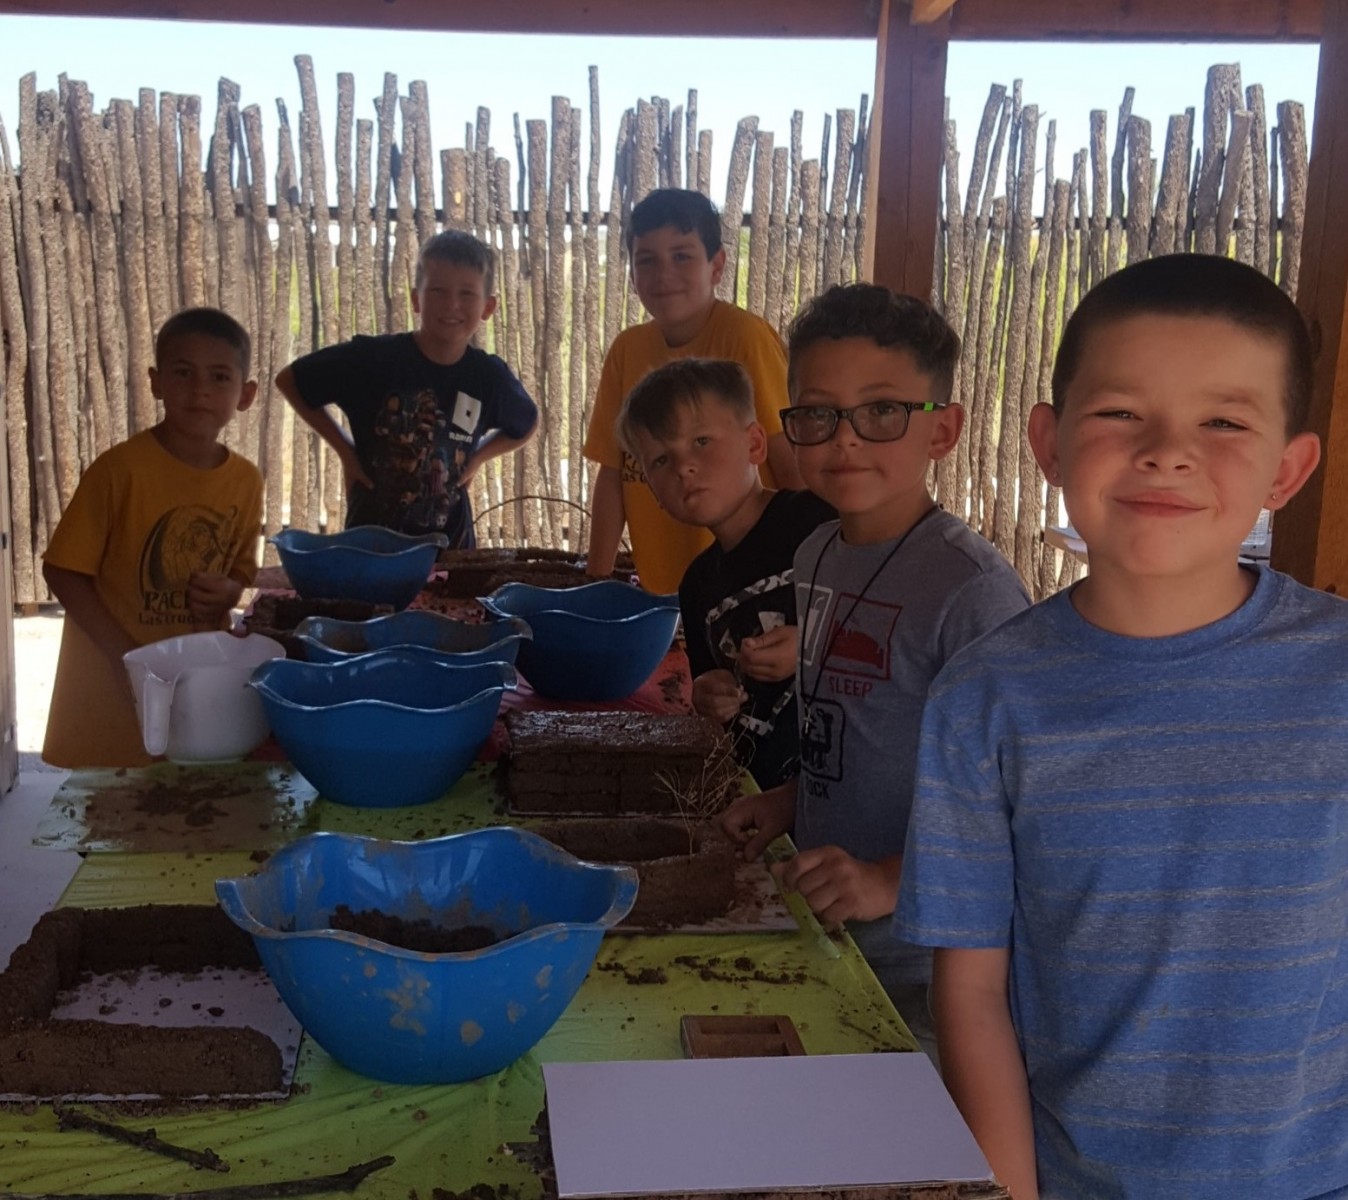 Adobe making during a summer day camp at Fort Selden Historic Site.